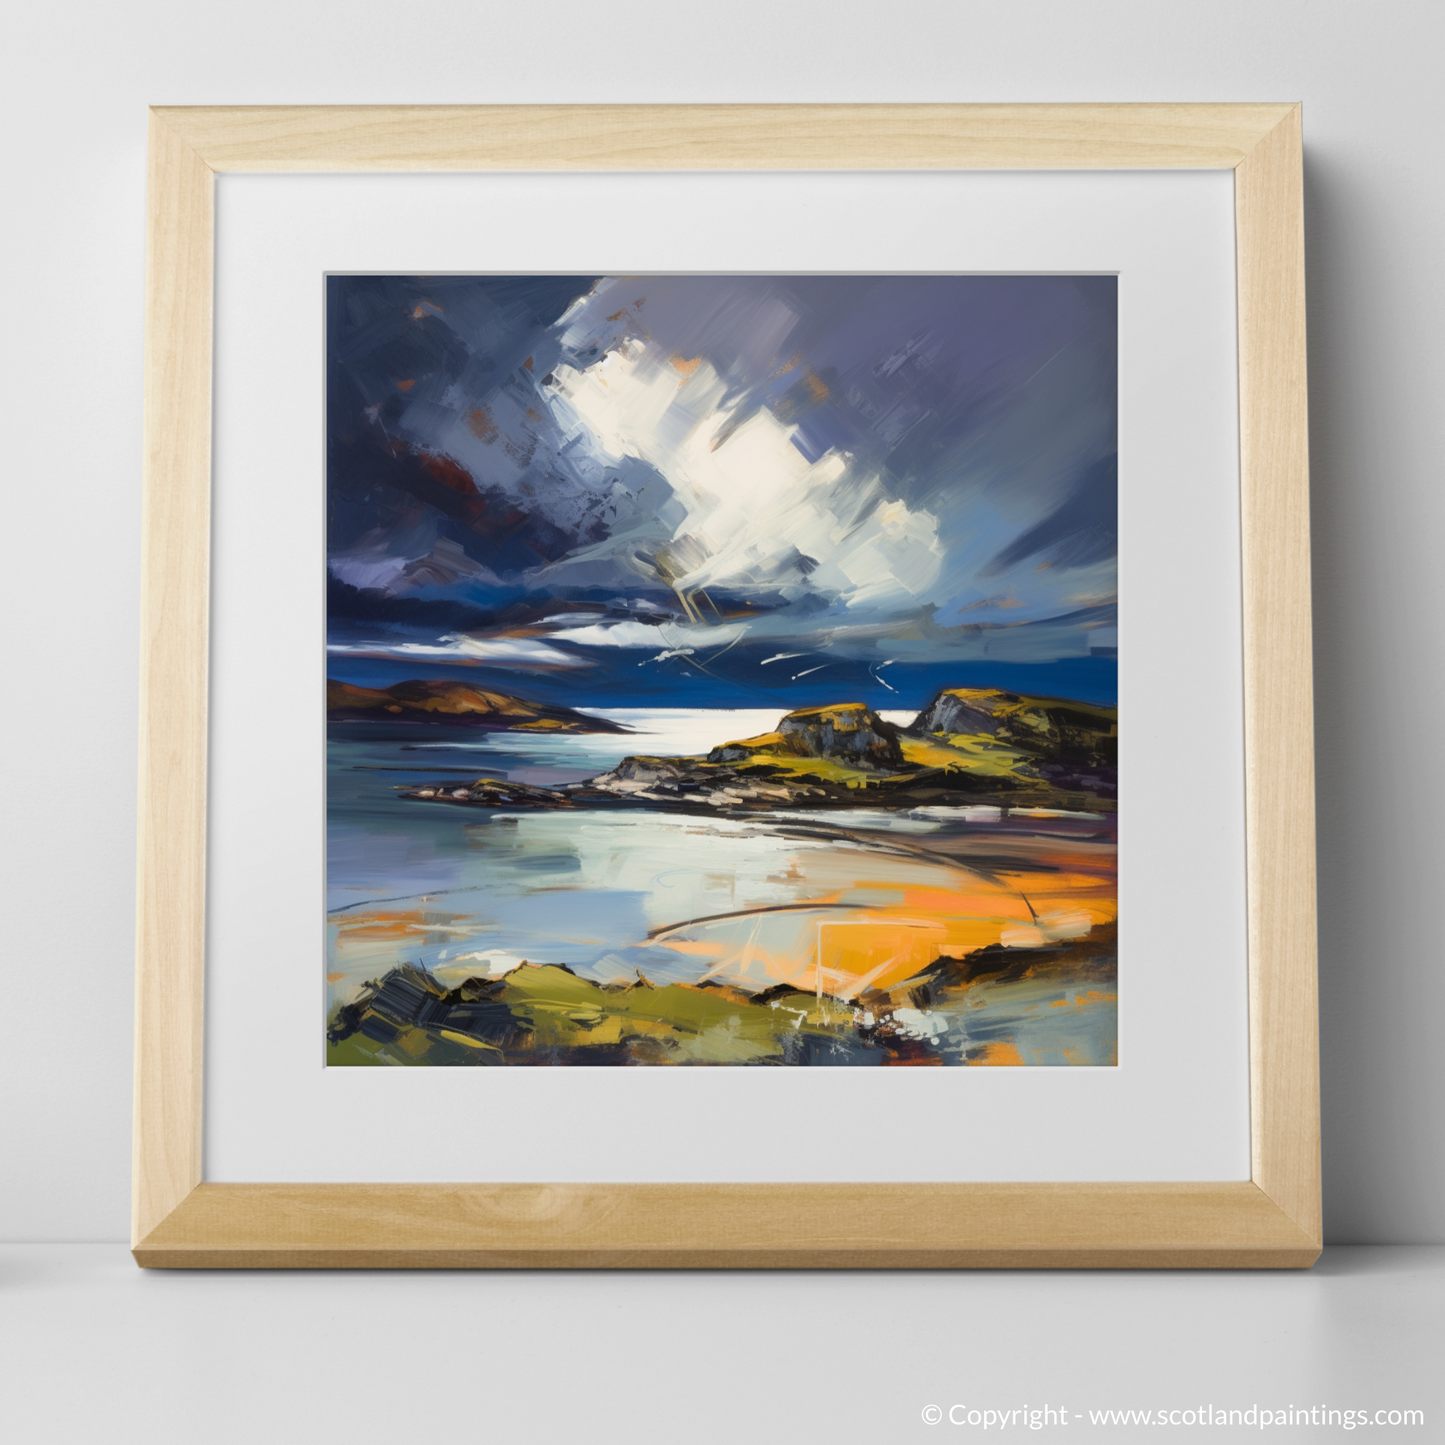 Art Print of Lochinver Bay with a stormy sky with a natural frame